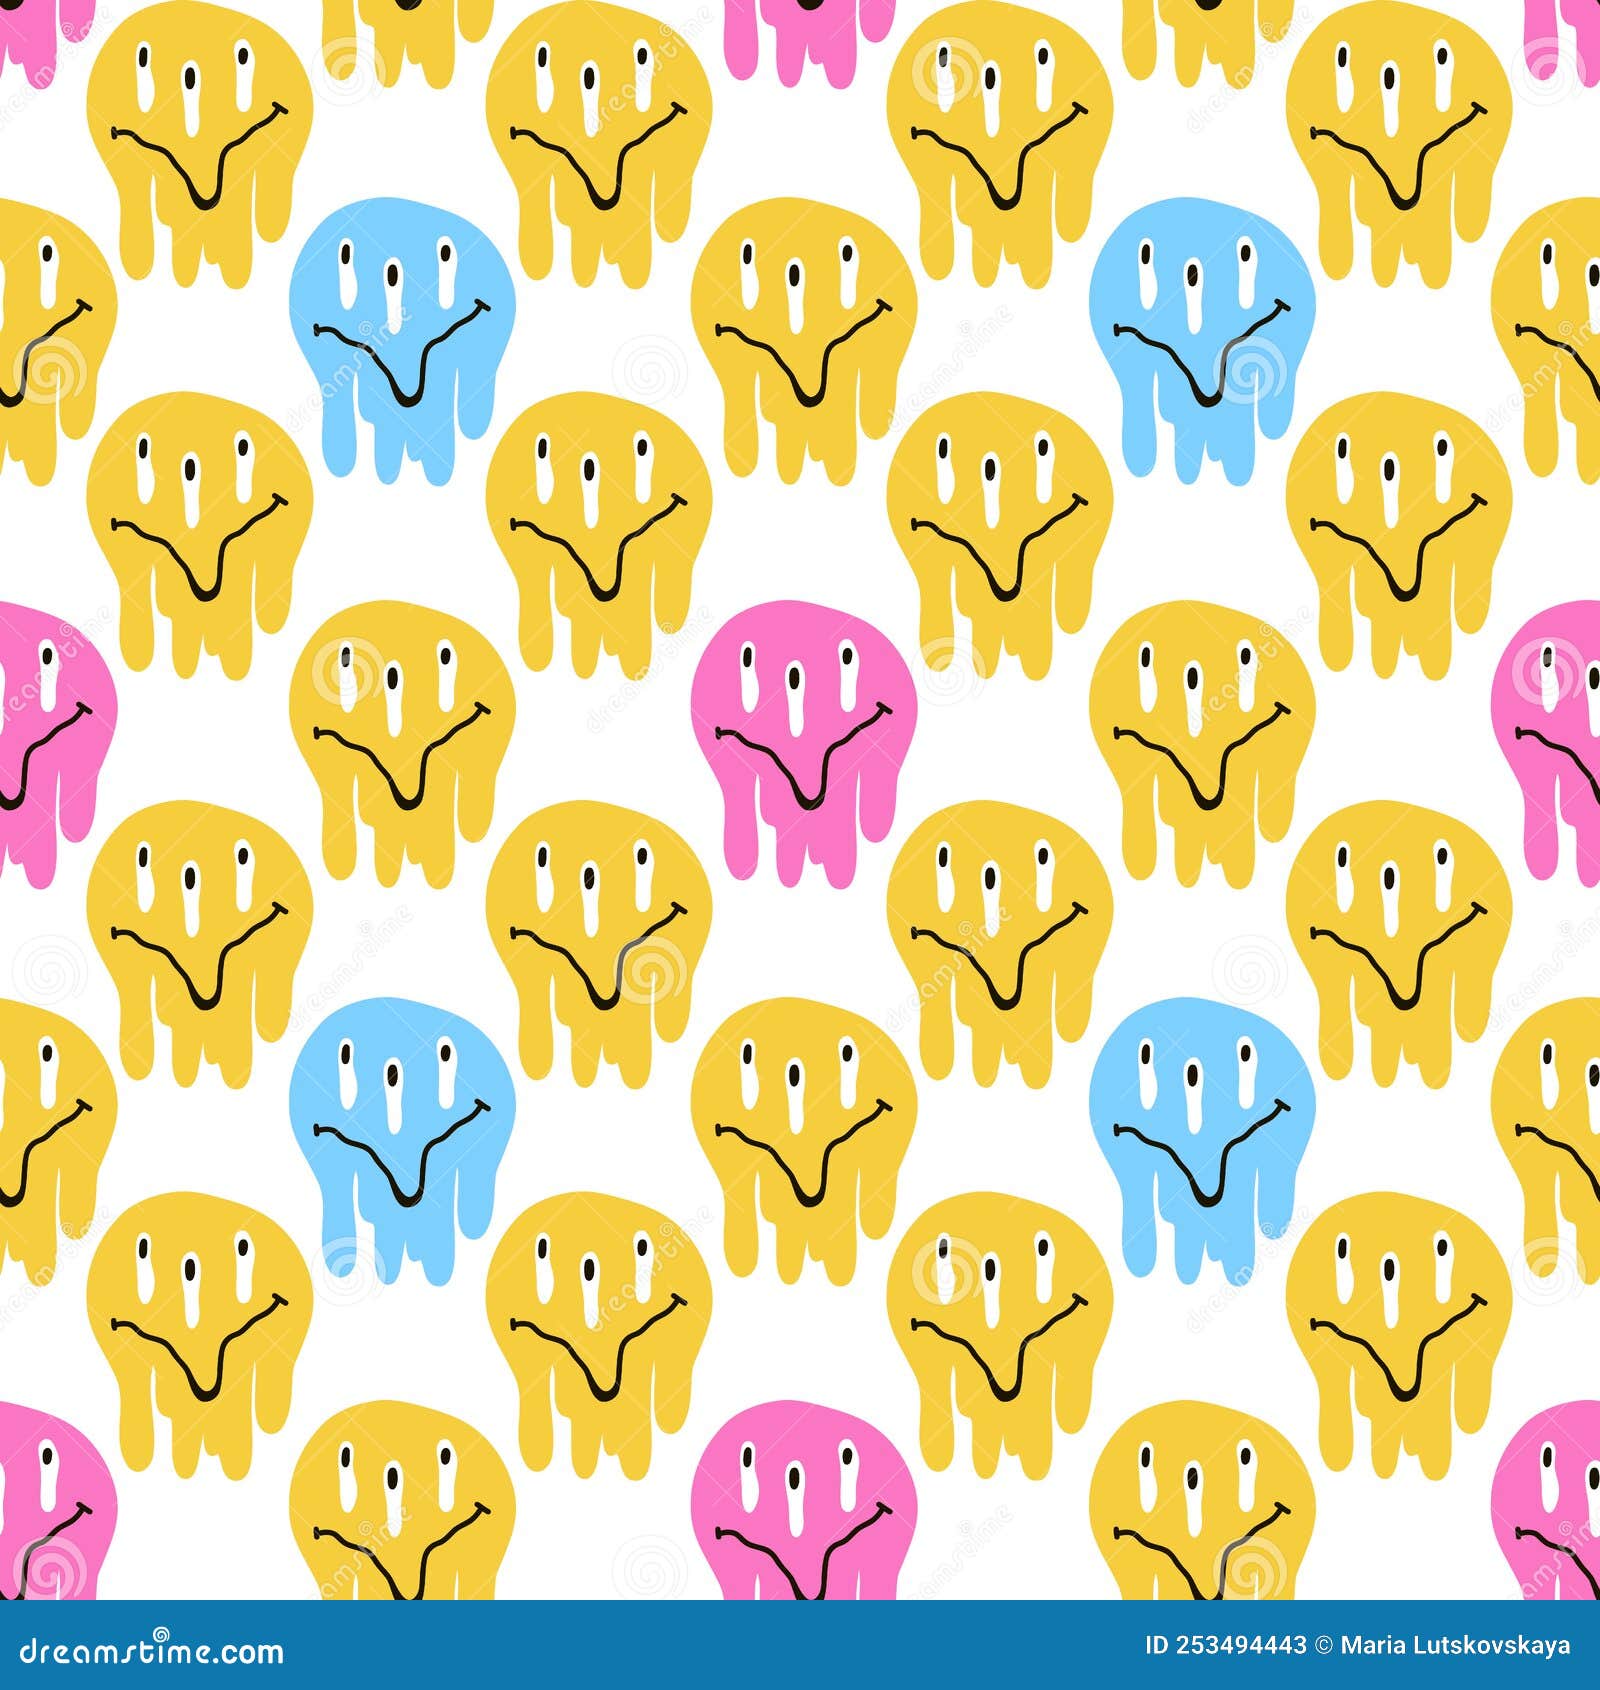 Melting Smiling Faces Seamless Pattern. Yellow Colorful Groovy Emoji ...